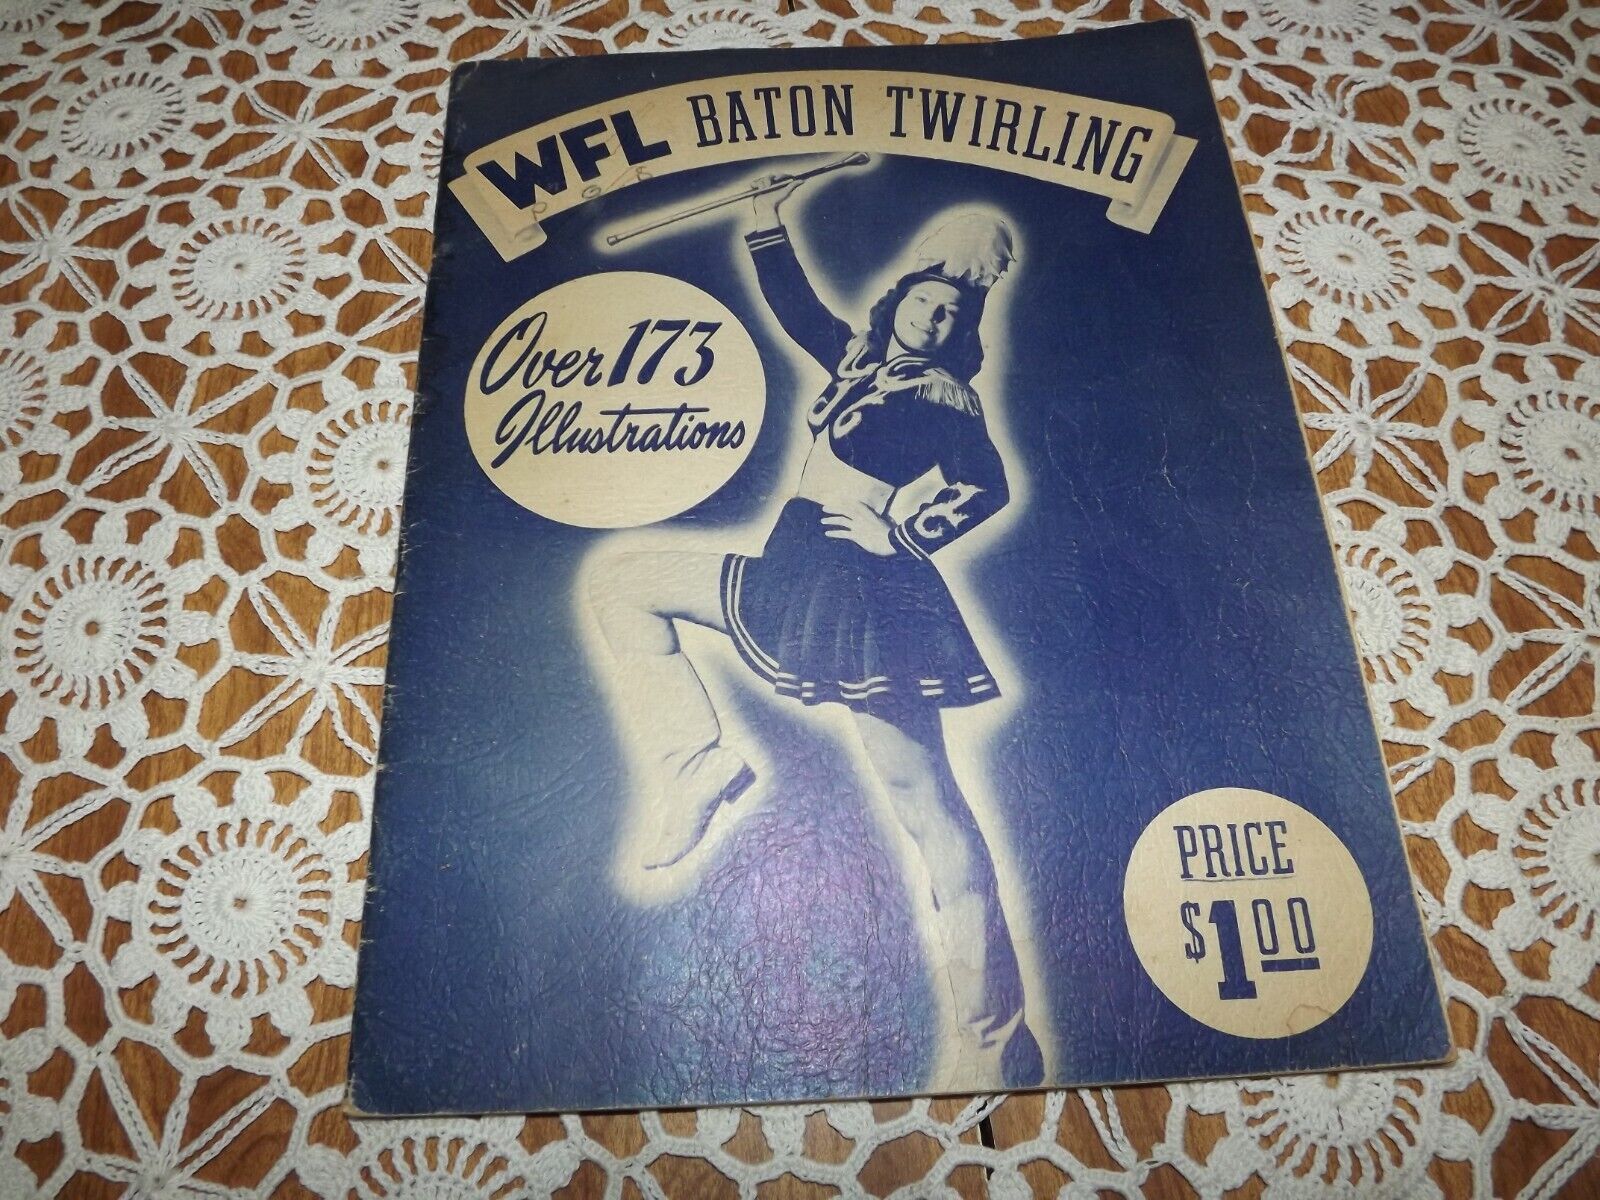 Baton Twirling 175 Illustrations Chicago, IL Book Manual, WFL Drum Company Vint